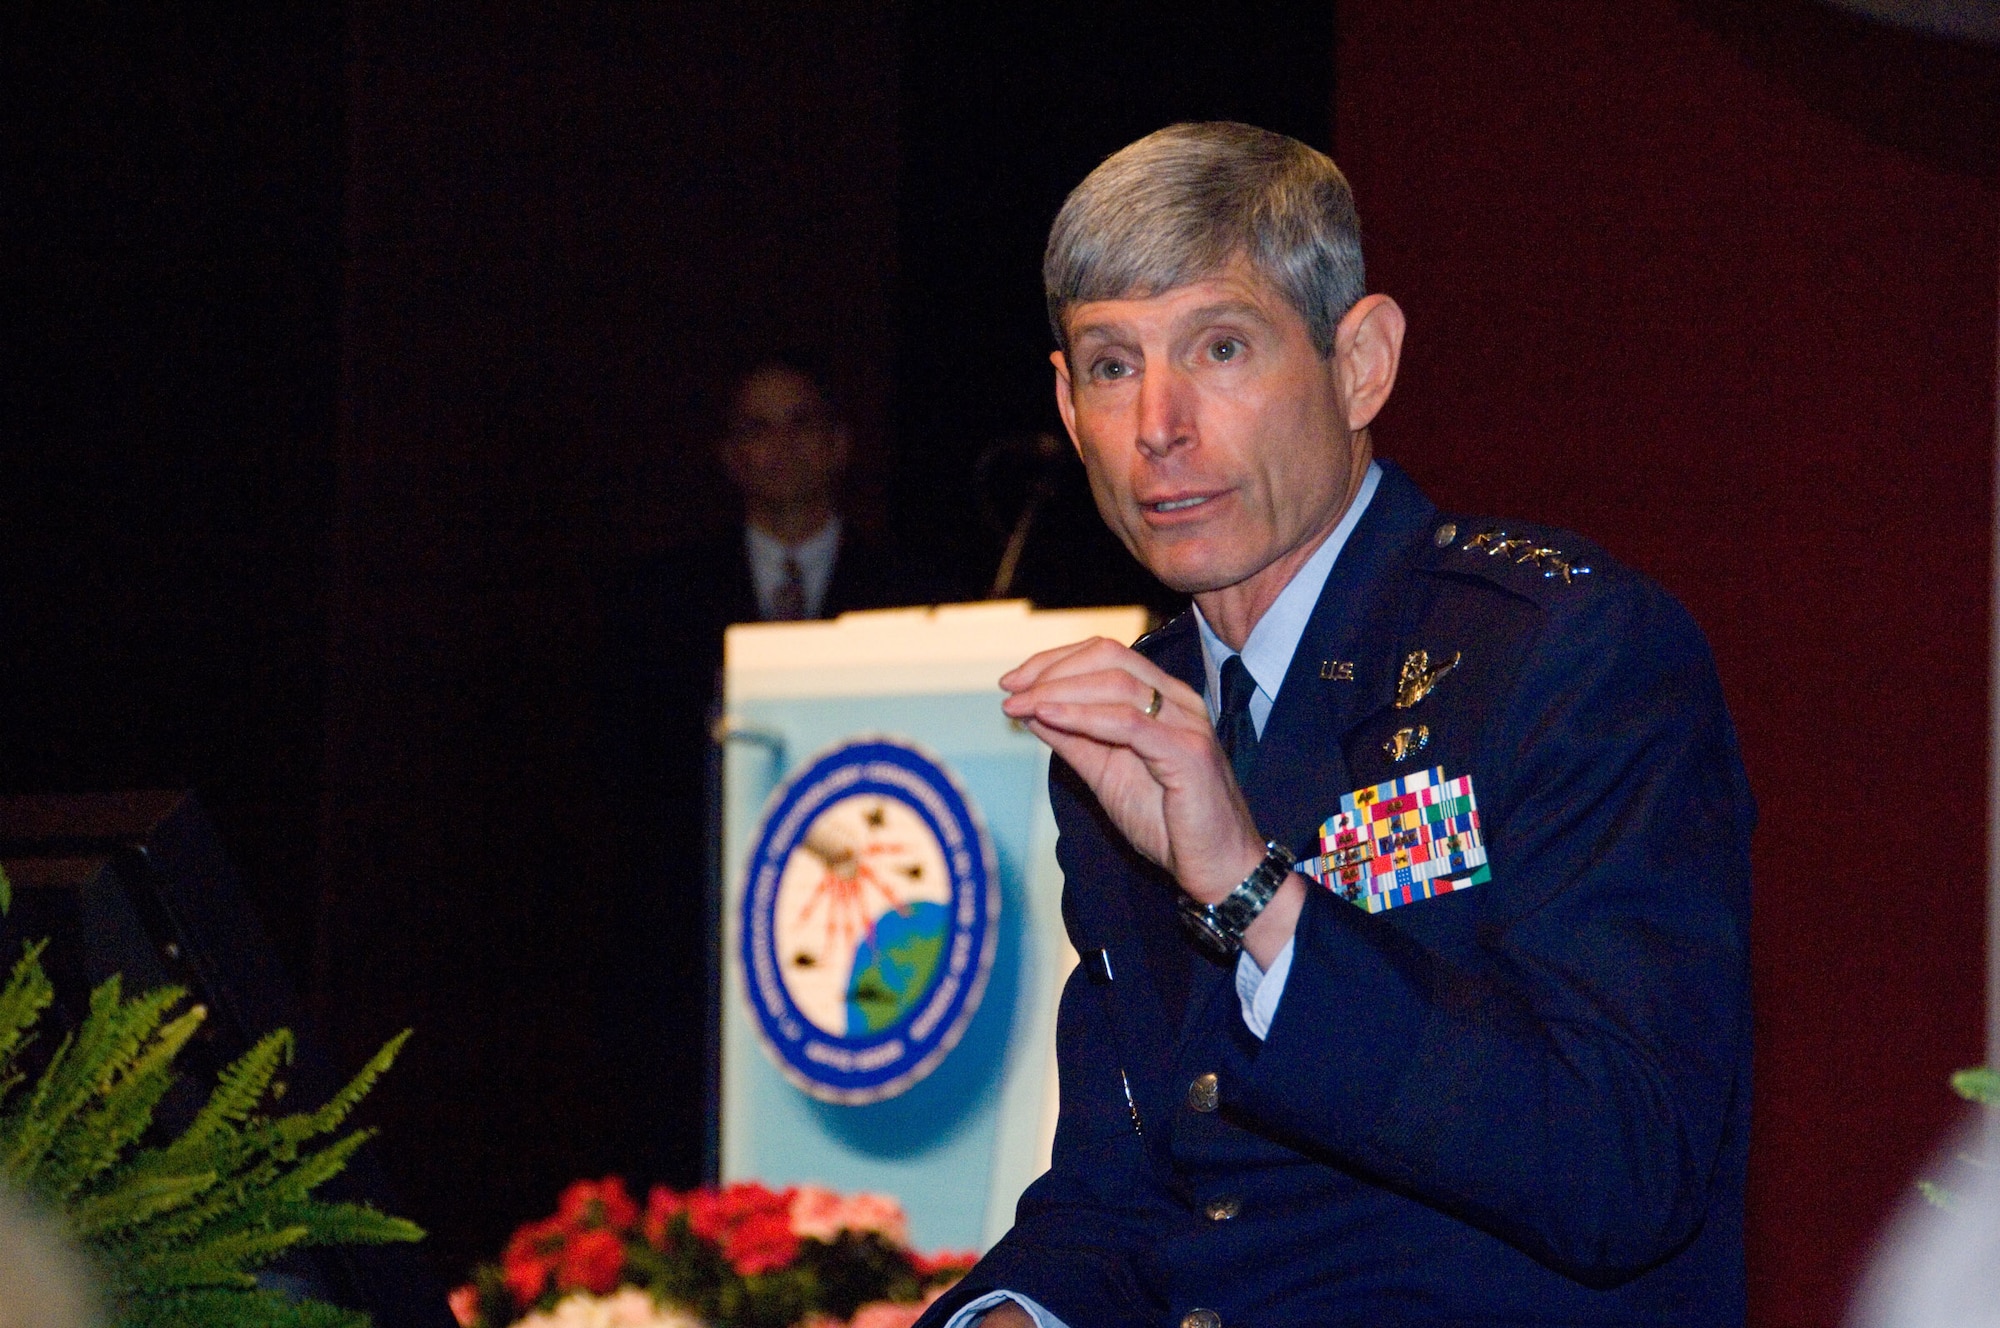 Gen. Norton A. Schwartz, the Air Force chief of staff, spoke to more than 5,500 Air Force Information Technology Conference attendees Aug. 24 in Montgomery, Ala. This year's theme, "The Warfighter’s Edge in Battlespace,” aims to highlight the role of information technology in the joint fight. (U.S. Air Force photo/Melanie Rodgers Cox)